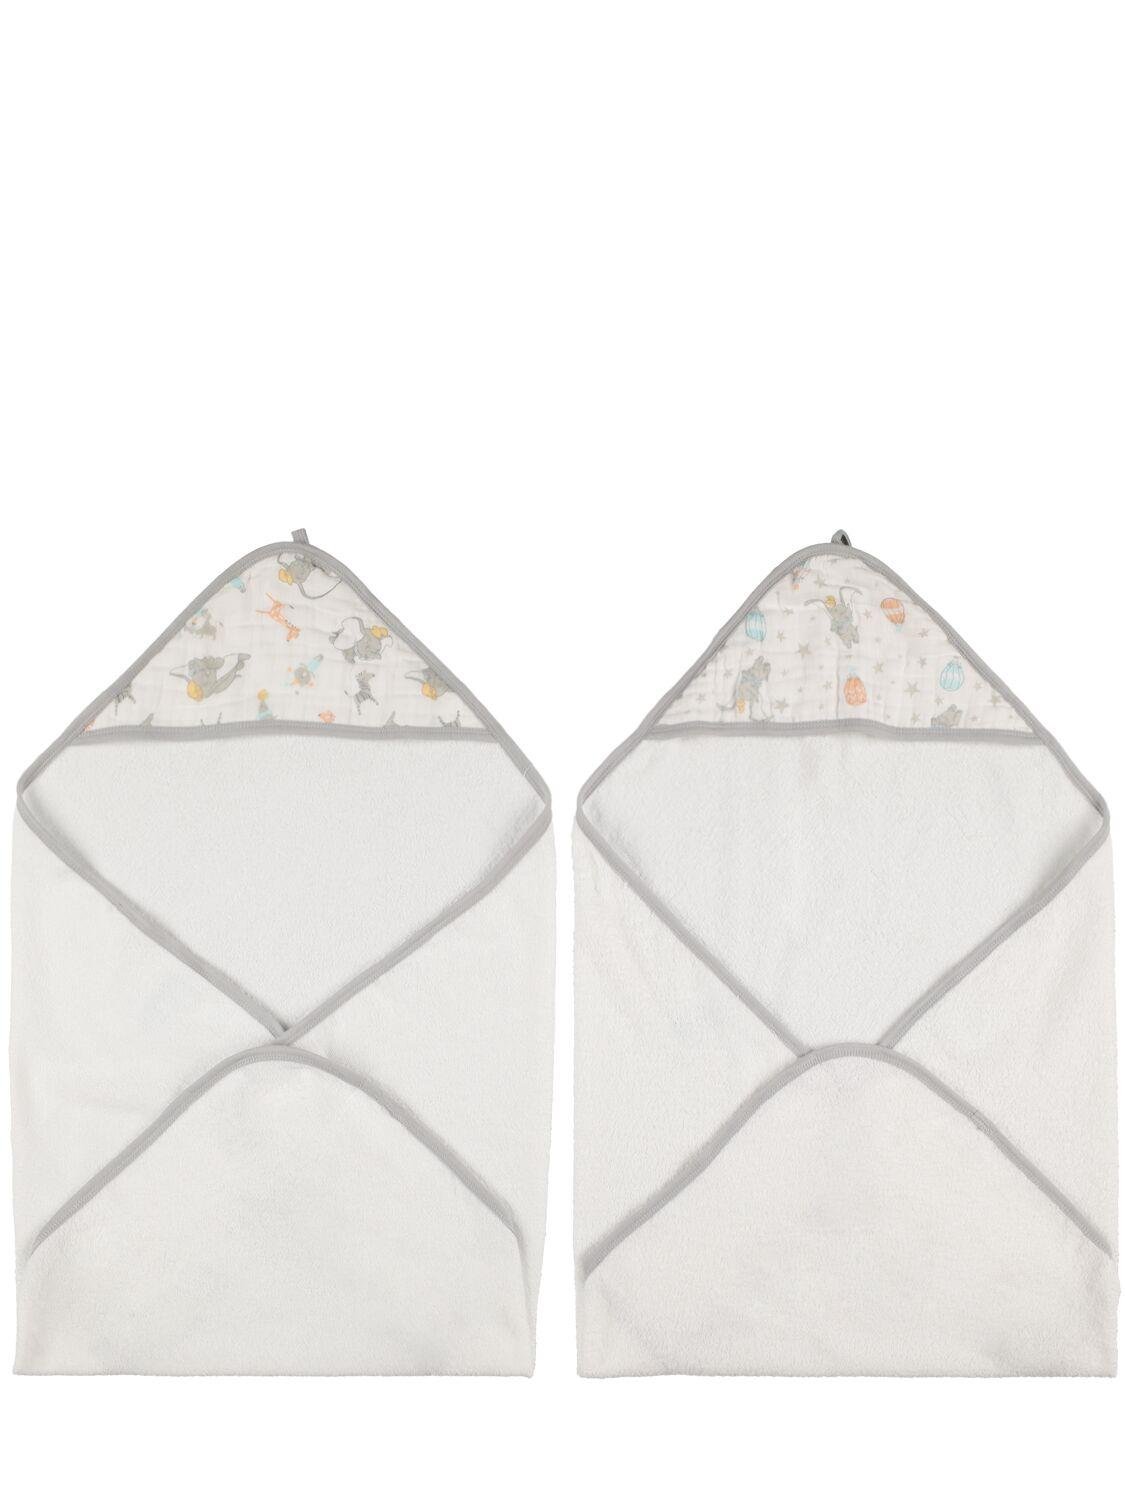 Dumbo New Heights Hooded Cotton Towels by ADEN + ANAIS